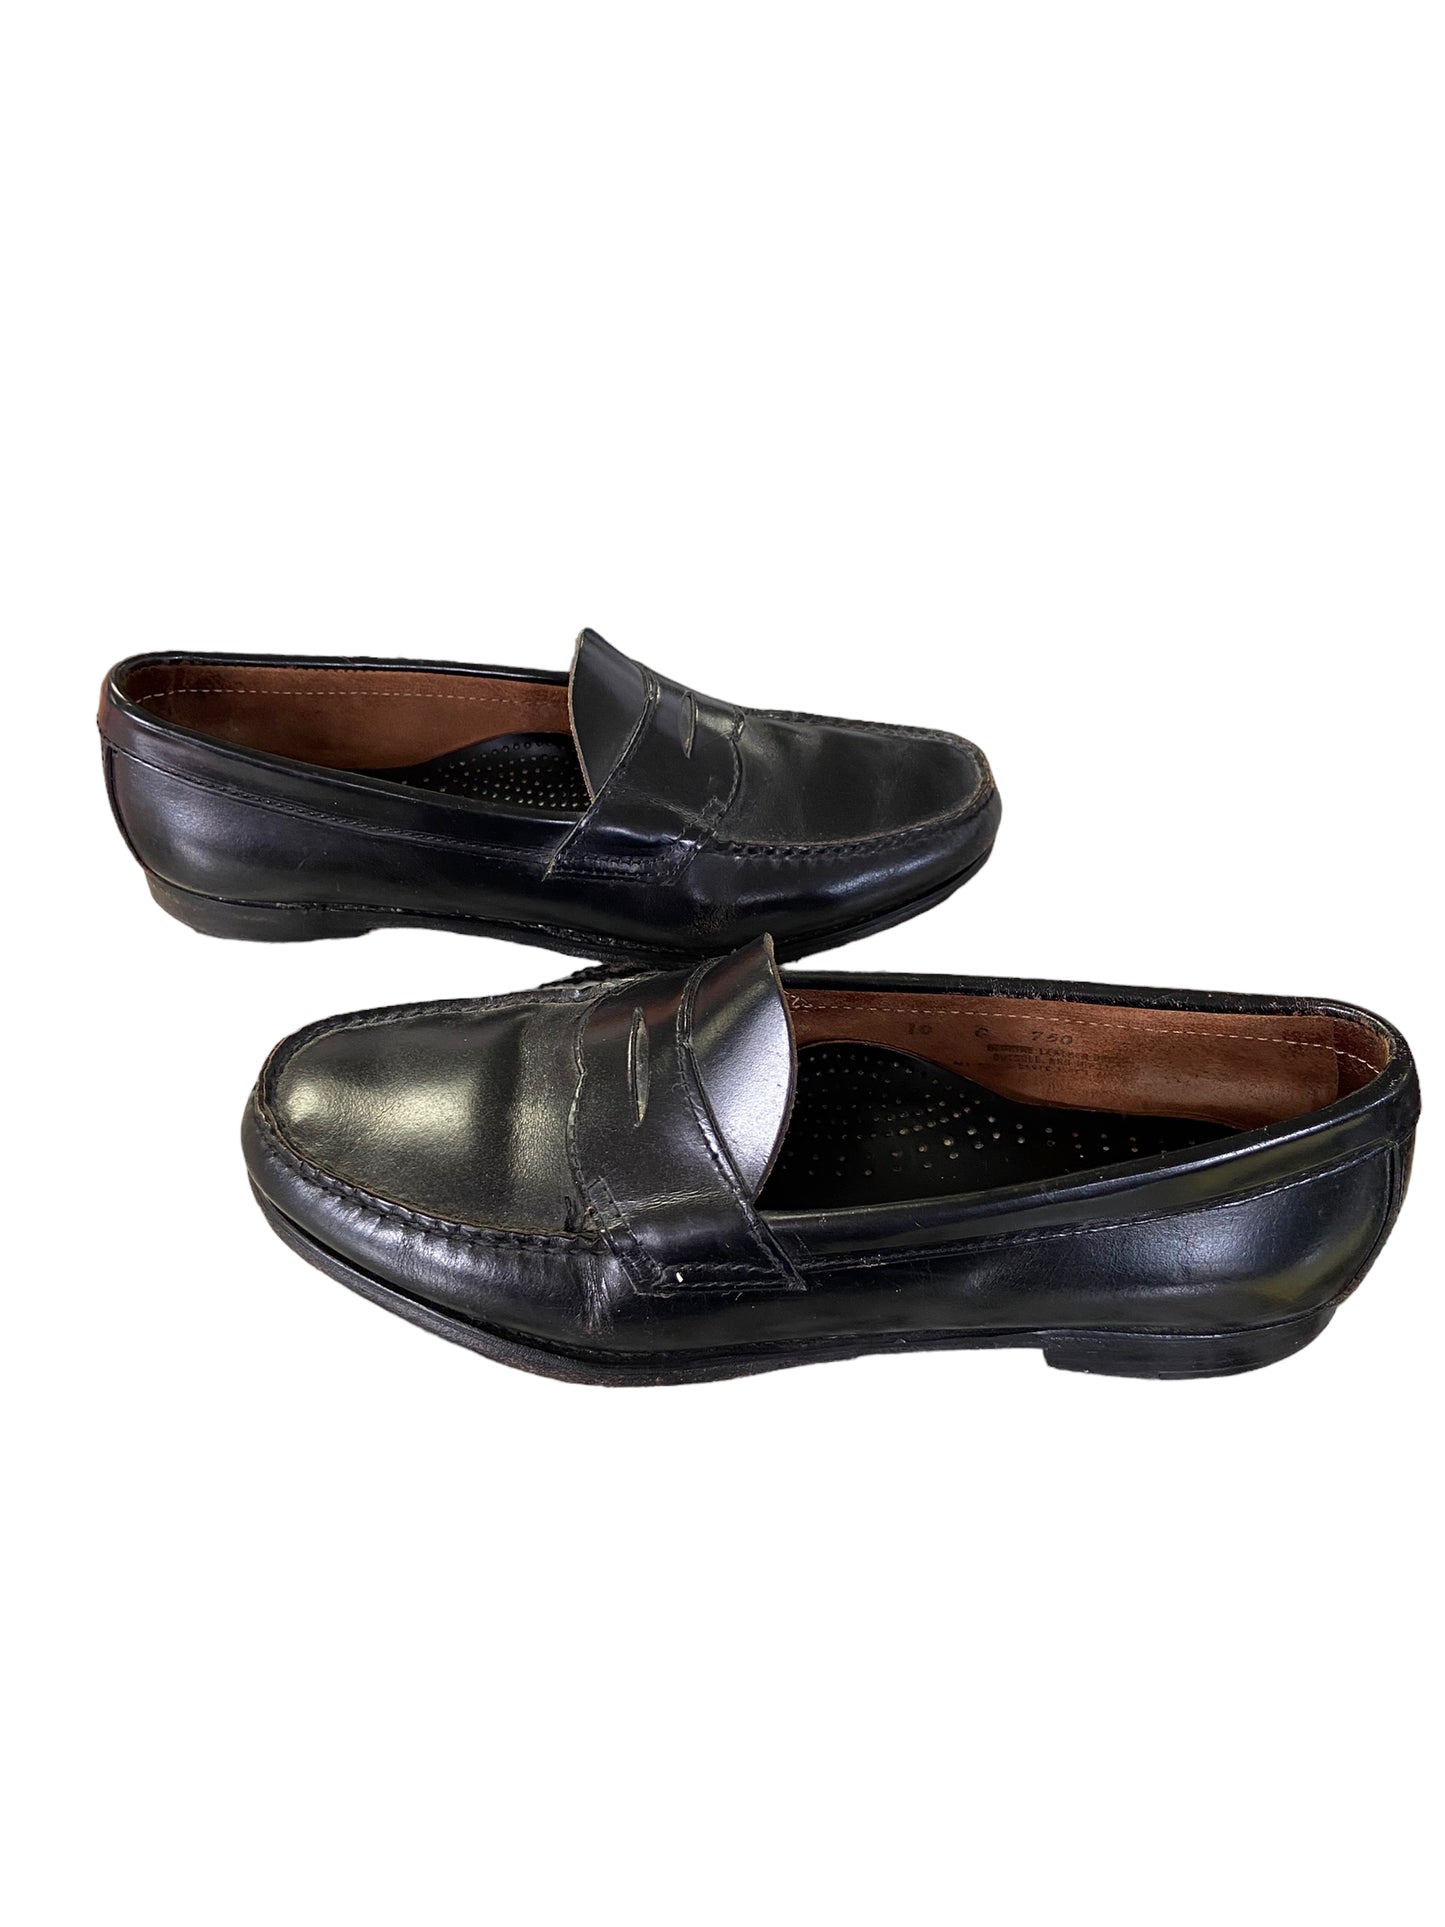 GH Bass & Co. Larson Weejuns Flat Strap Leather Loafers (Size 10)